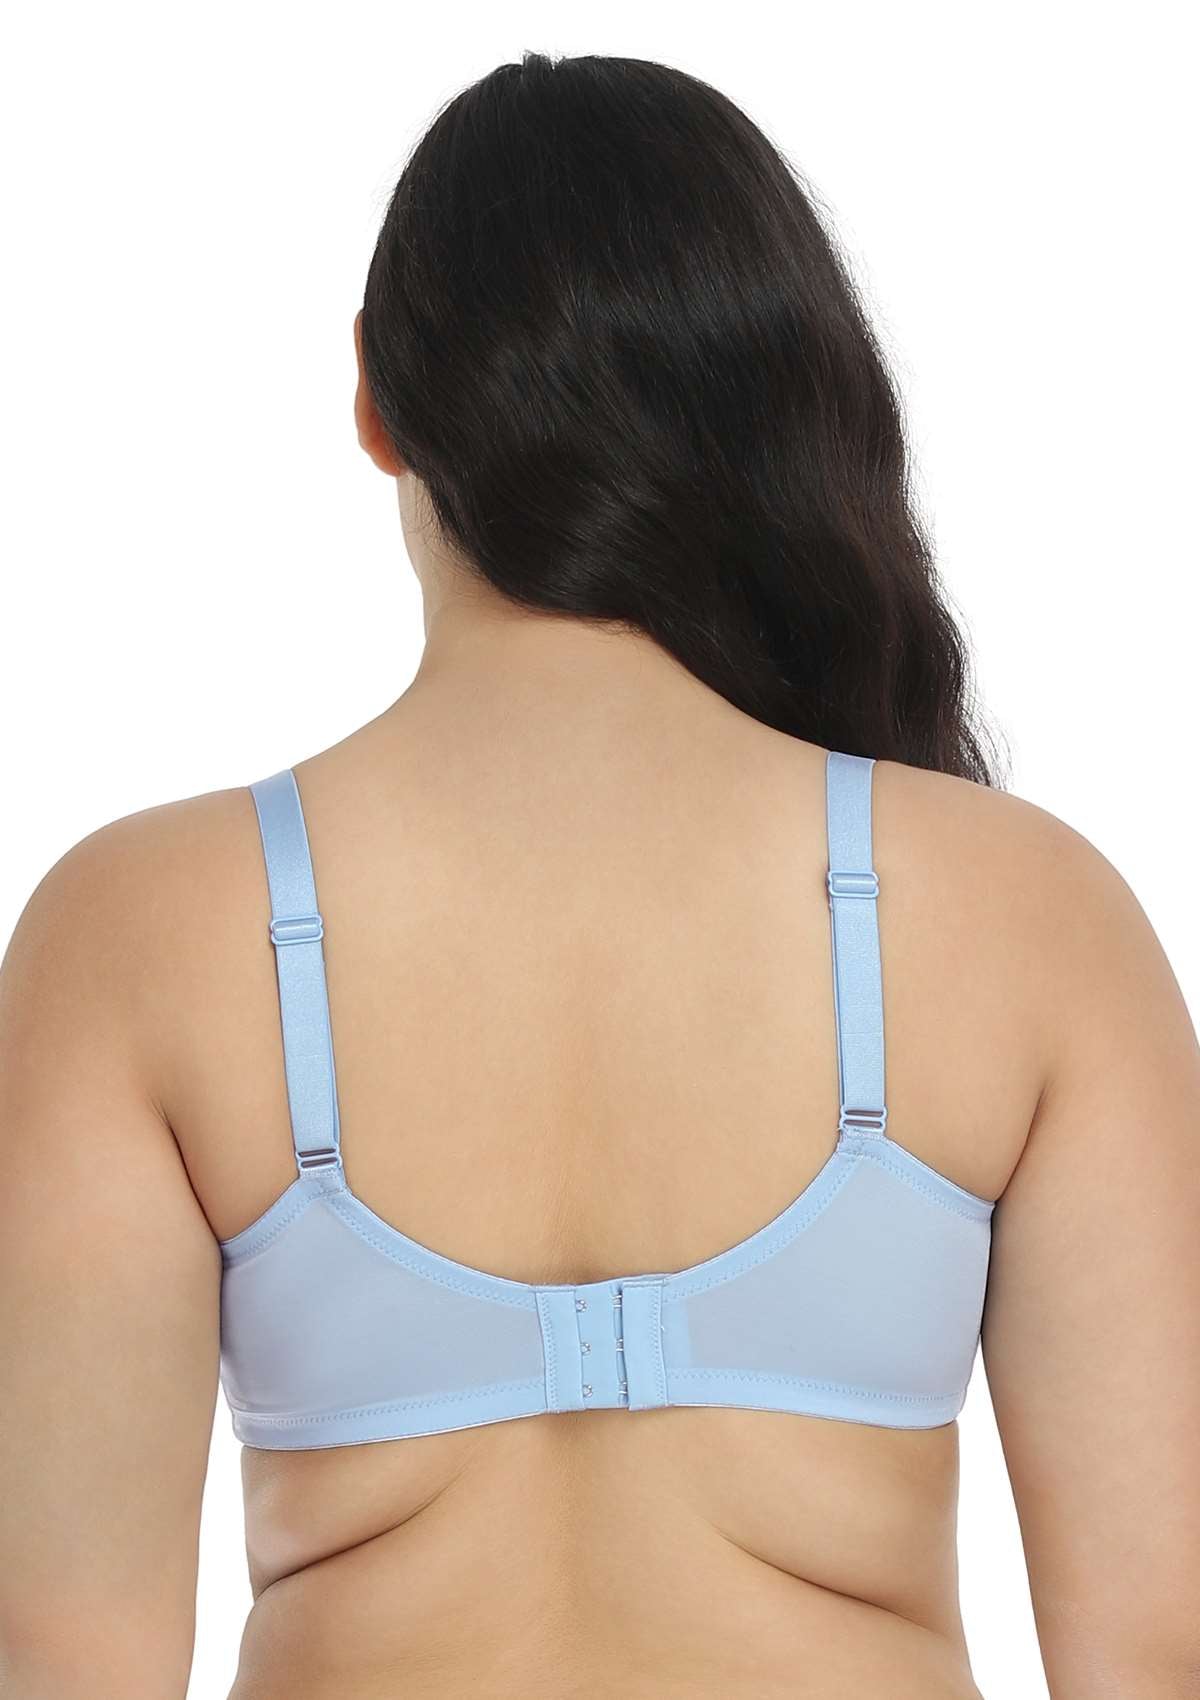 HSIA Pretty Secrets Lace-Trimmed Full Coverage Underwire Bra For Support - Light Blue / 44 / D